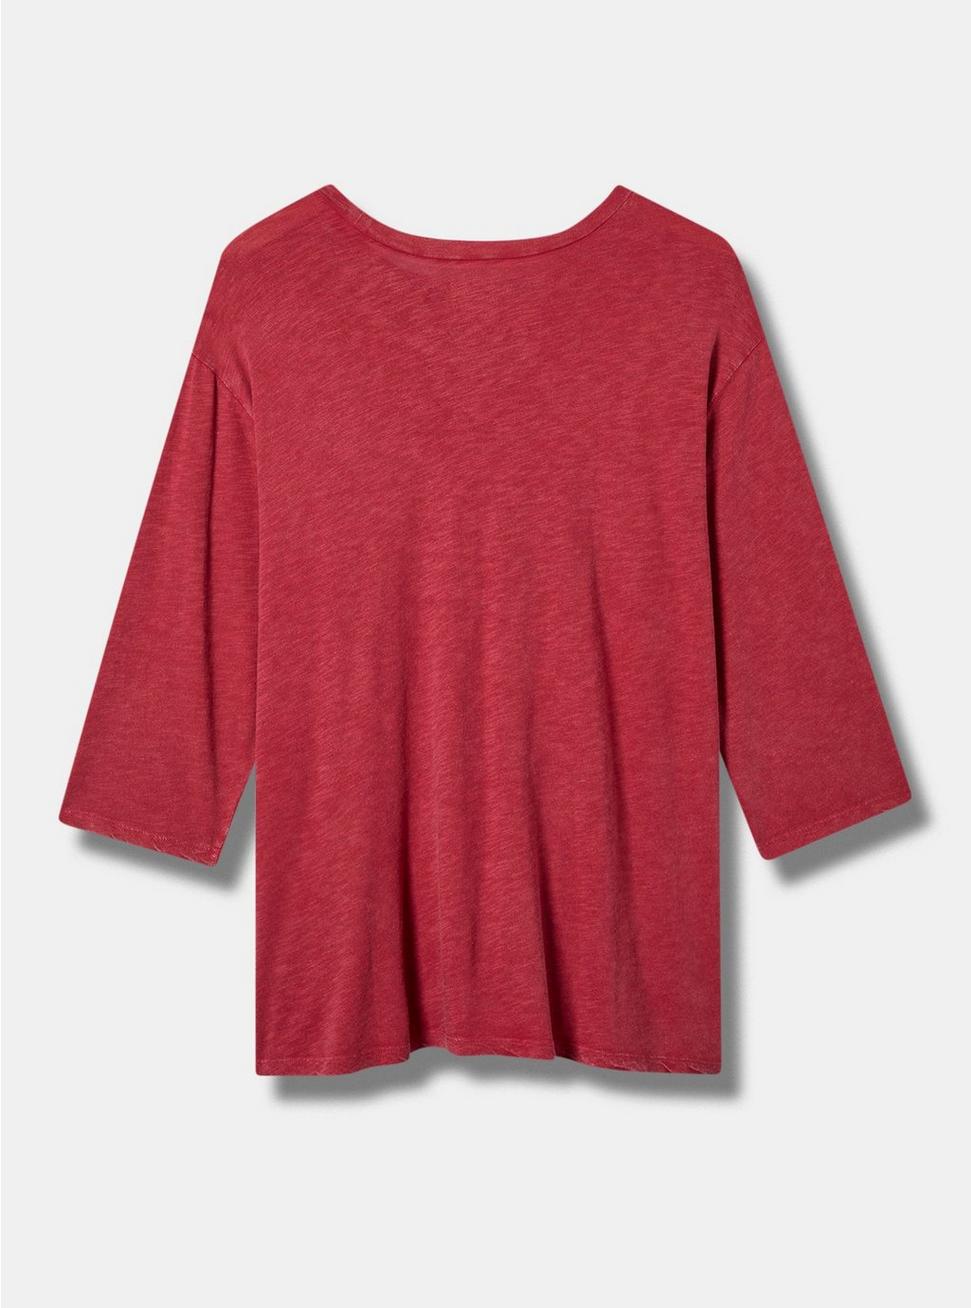 #TORRIDSTRONG Mental Health Relaxed Fit Cotton Burn Out Crew Neck 3/4 Sleeve Varsity Tee, RED BUD, alternate